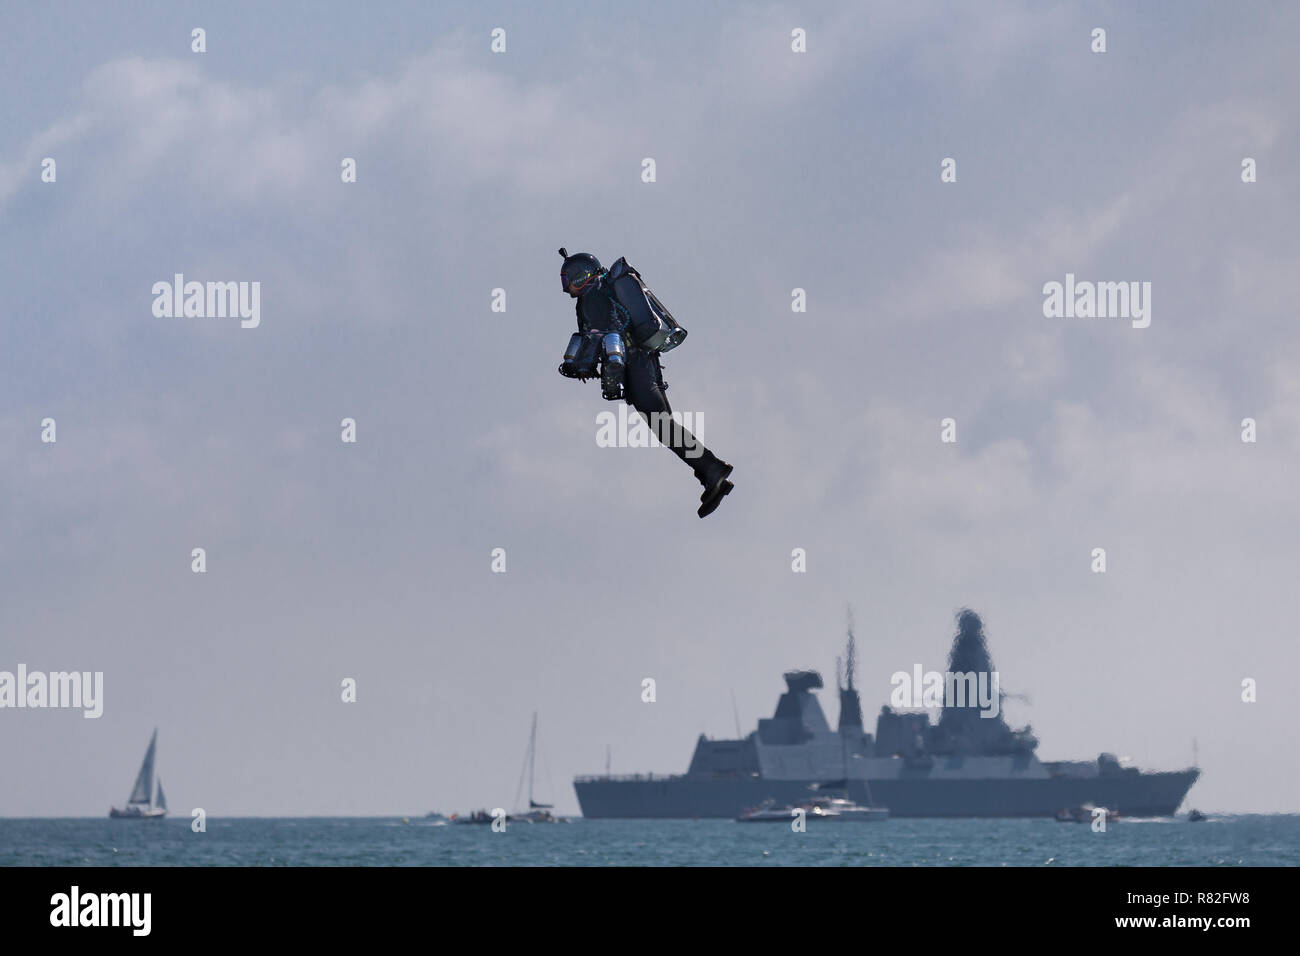 Gravity jet man hovers in front of naval vessel Stock Photo